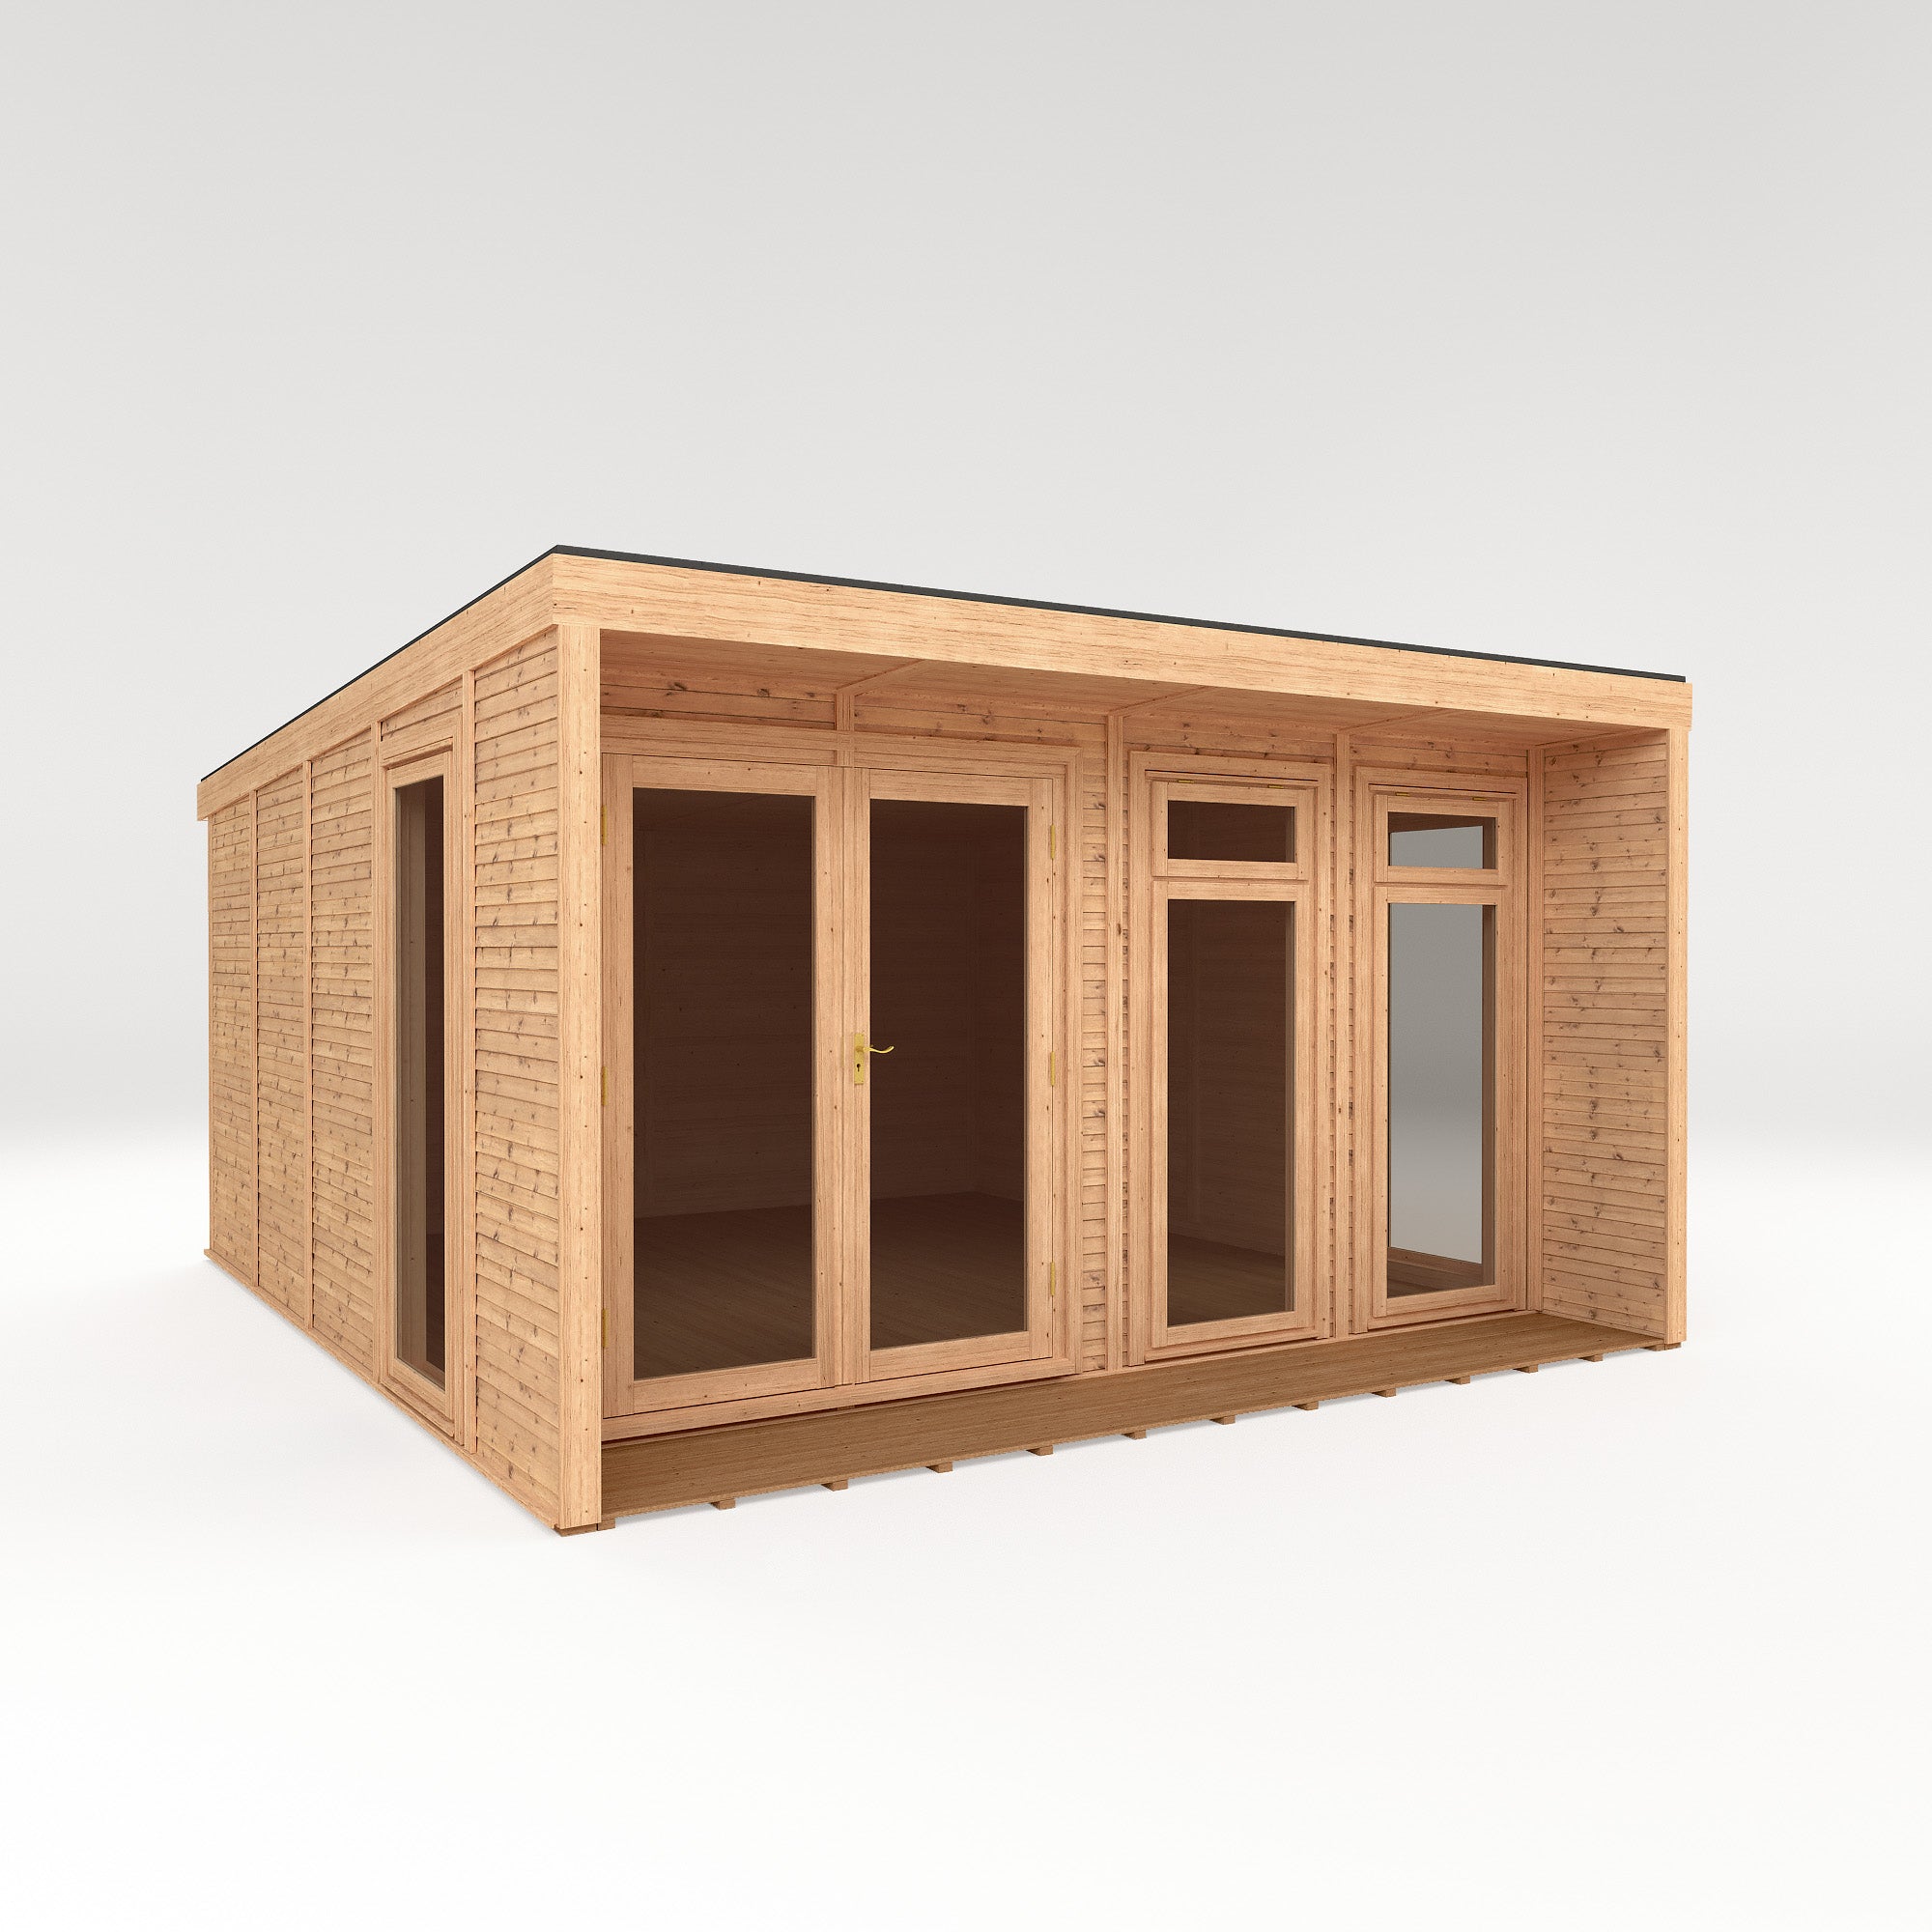 The Creswell Insulated Garden Room 4m x 4m